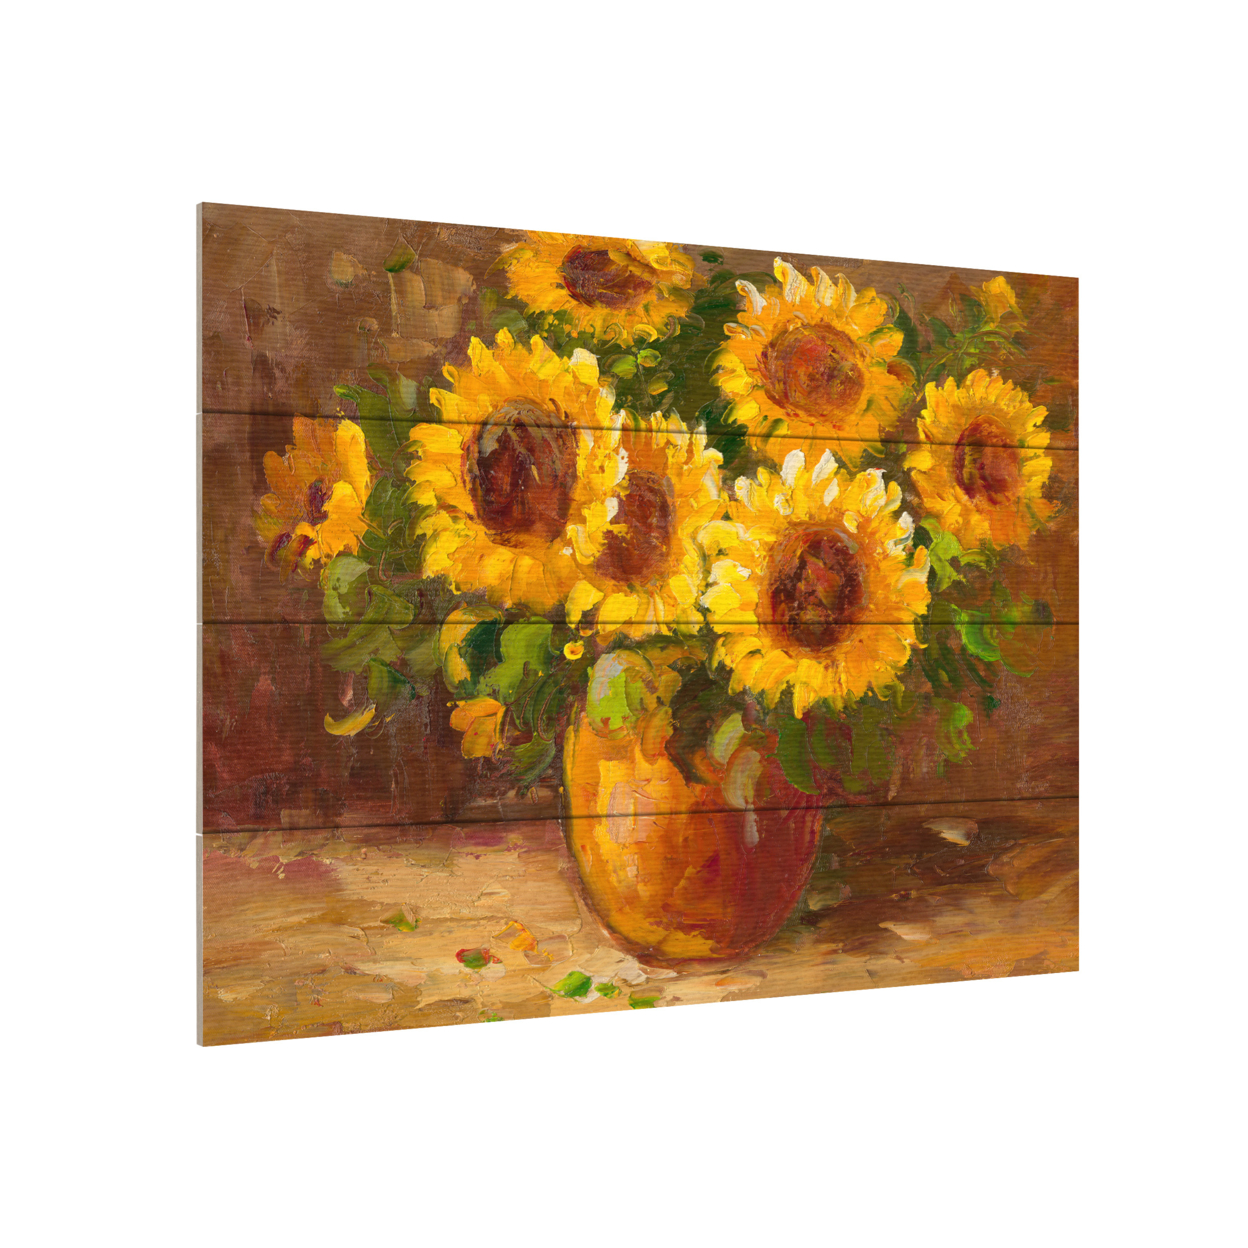 Wall Art 12 X 16 Inches Titled Sunflowers Still Life Ready To Hang Printed On Wooden Planks